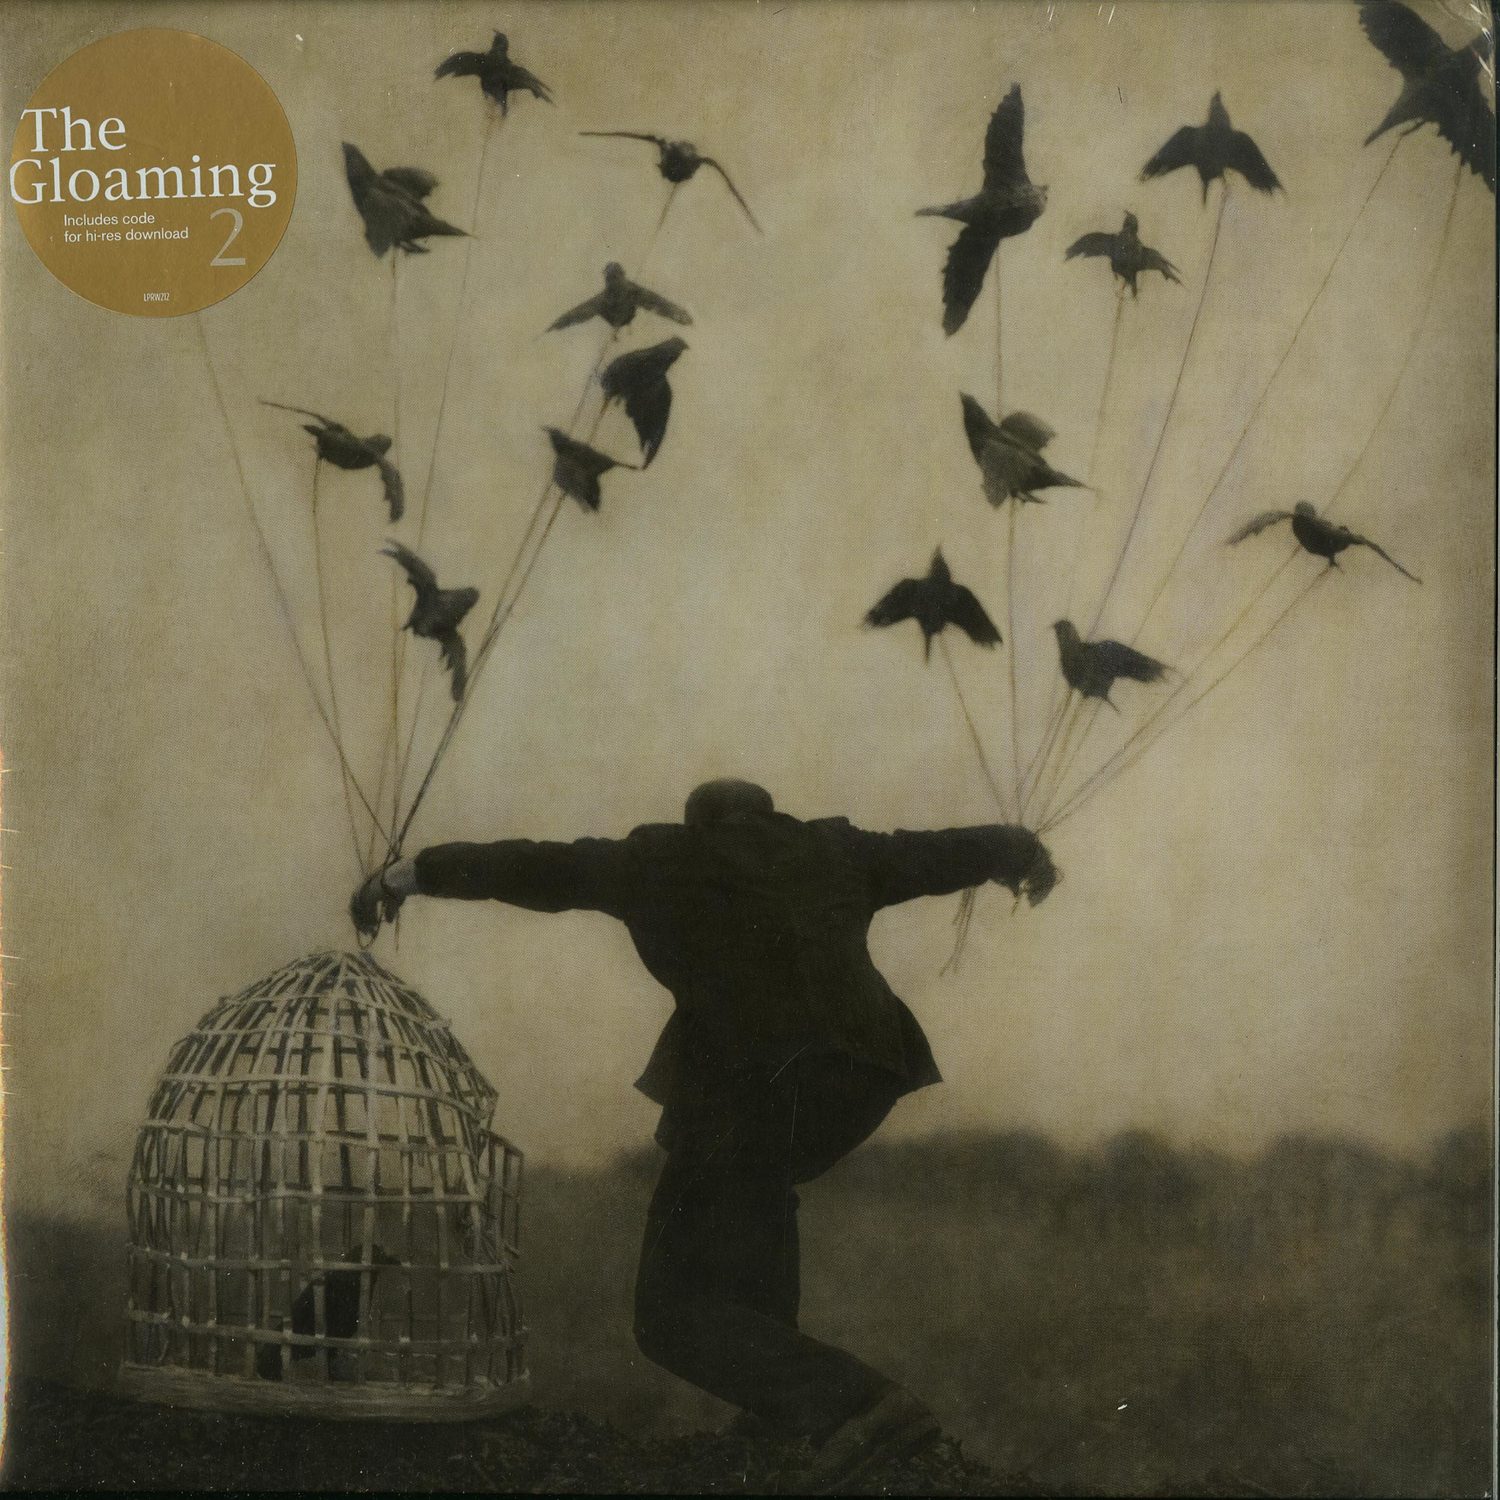 The Gloaming - 2 